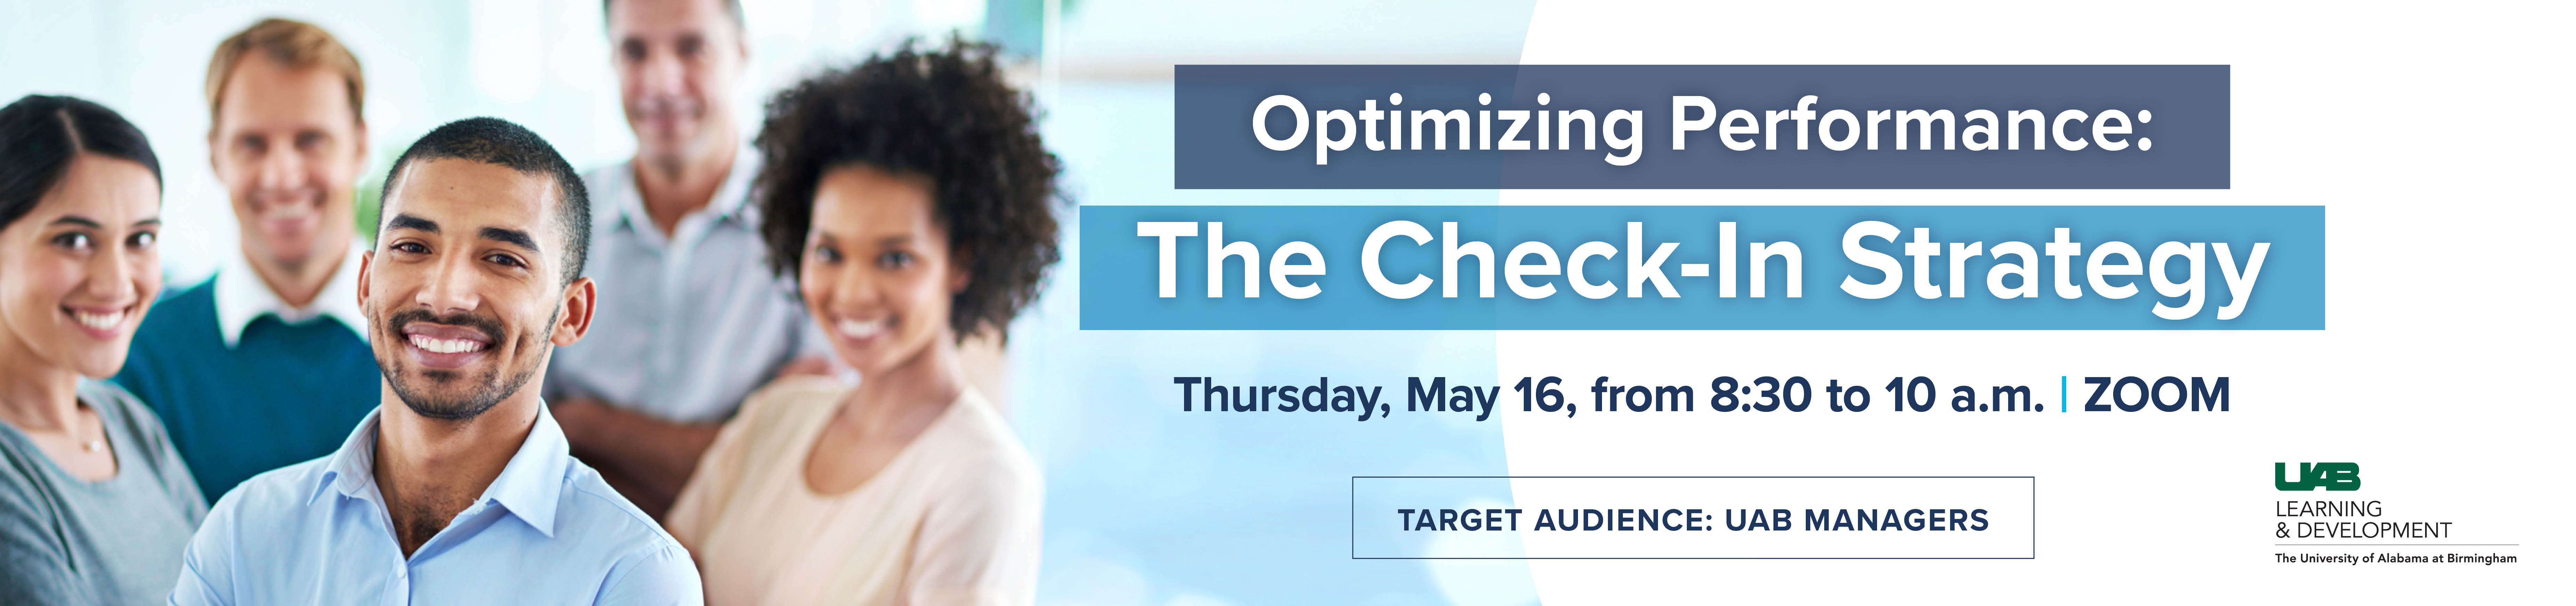 051624 Optimizing Performance Your Check In Strategy SLIDER